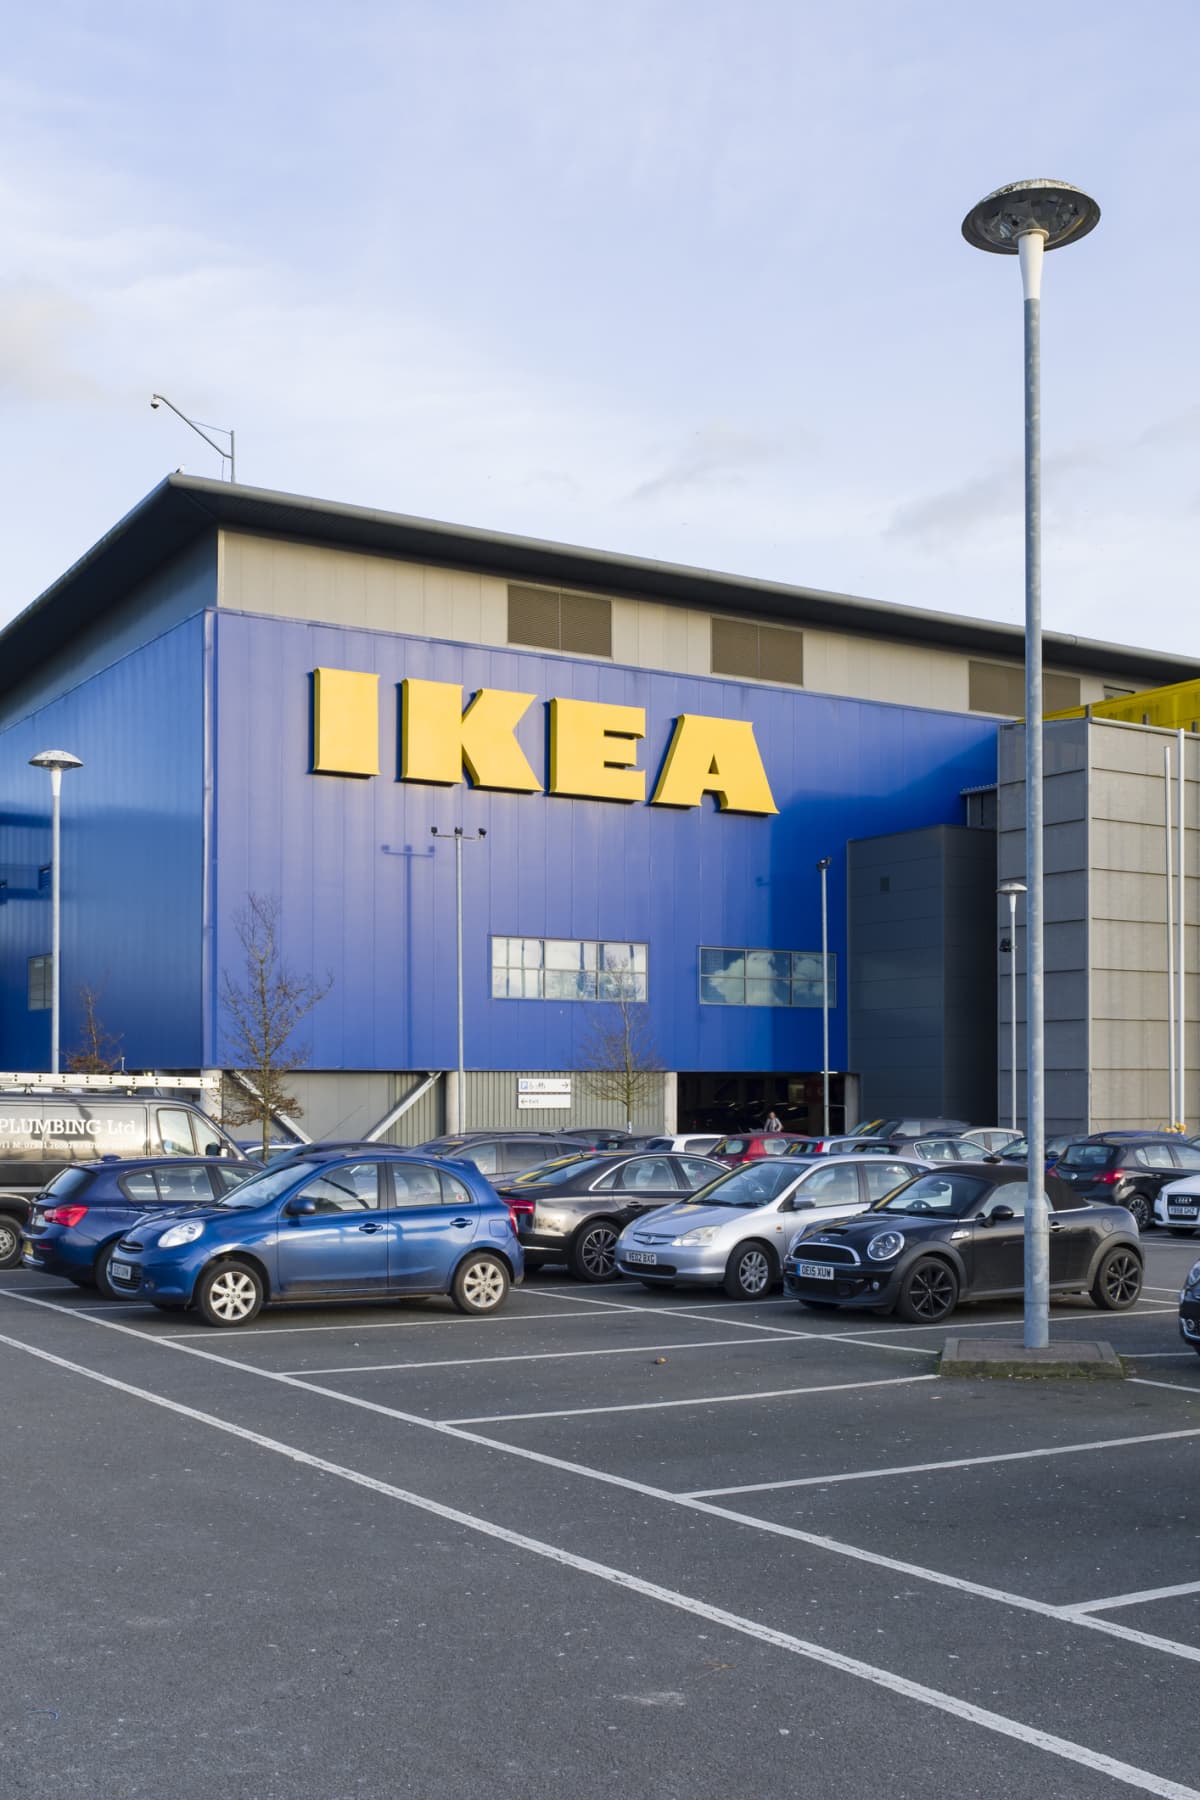 Milton Keynes, UK - February 12, 2020. Ikea store with car parks and cars in Milton Keynes